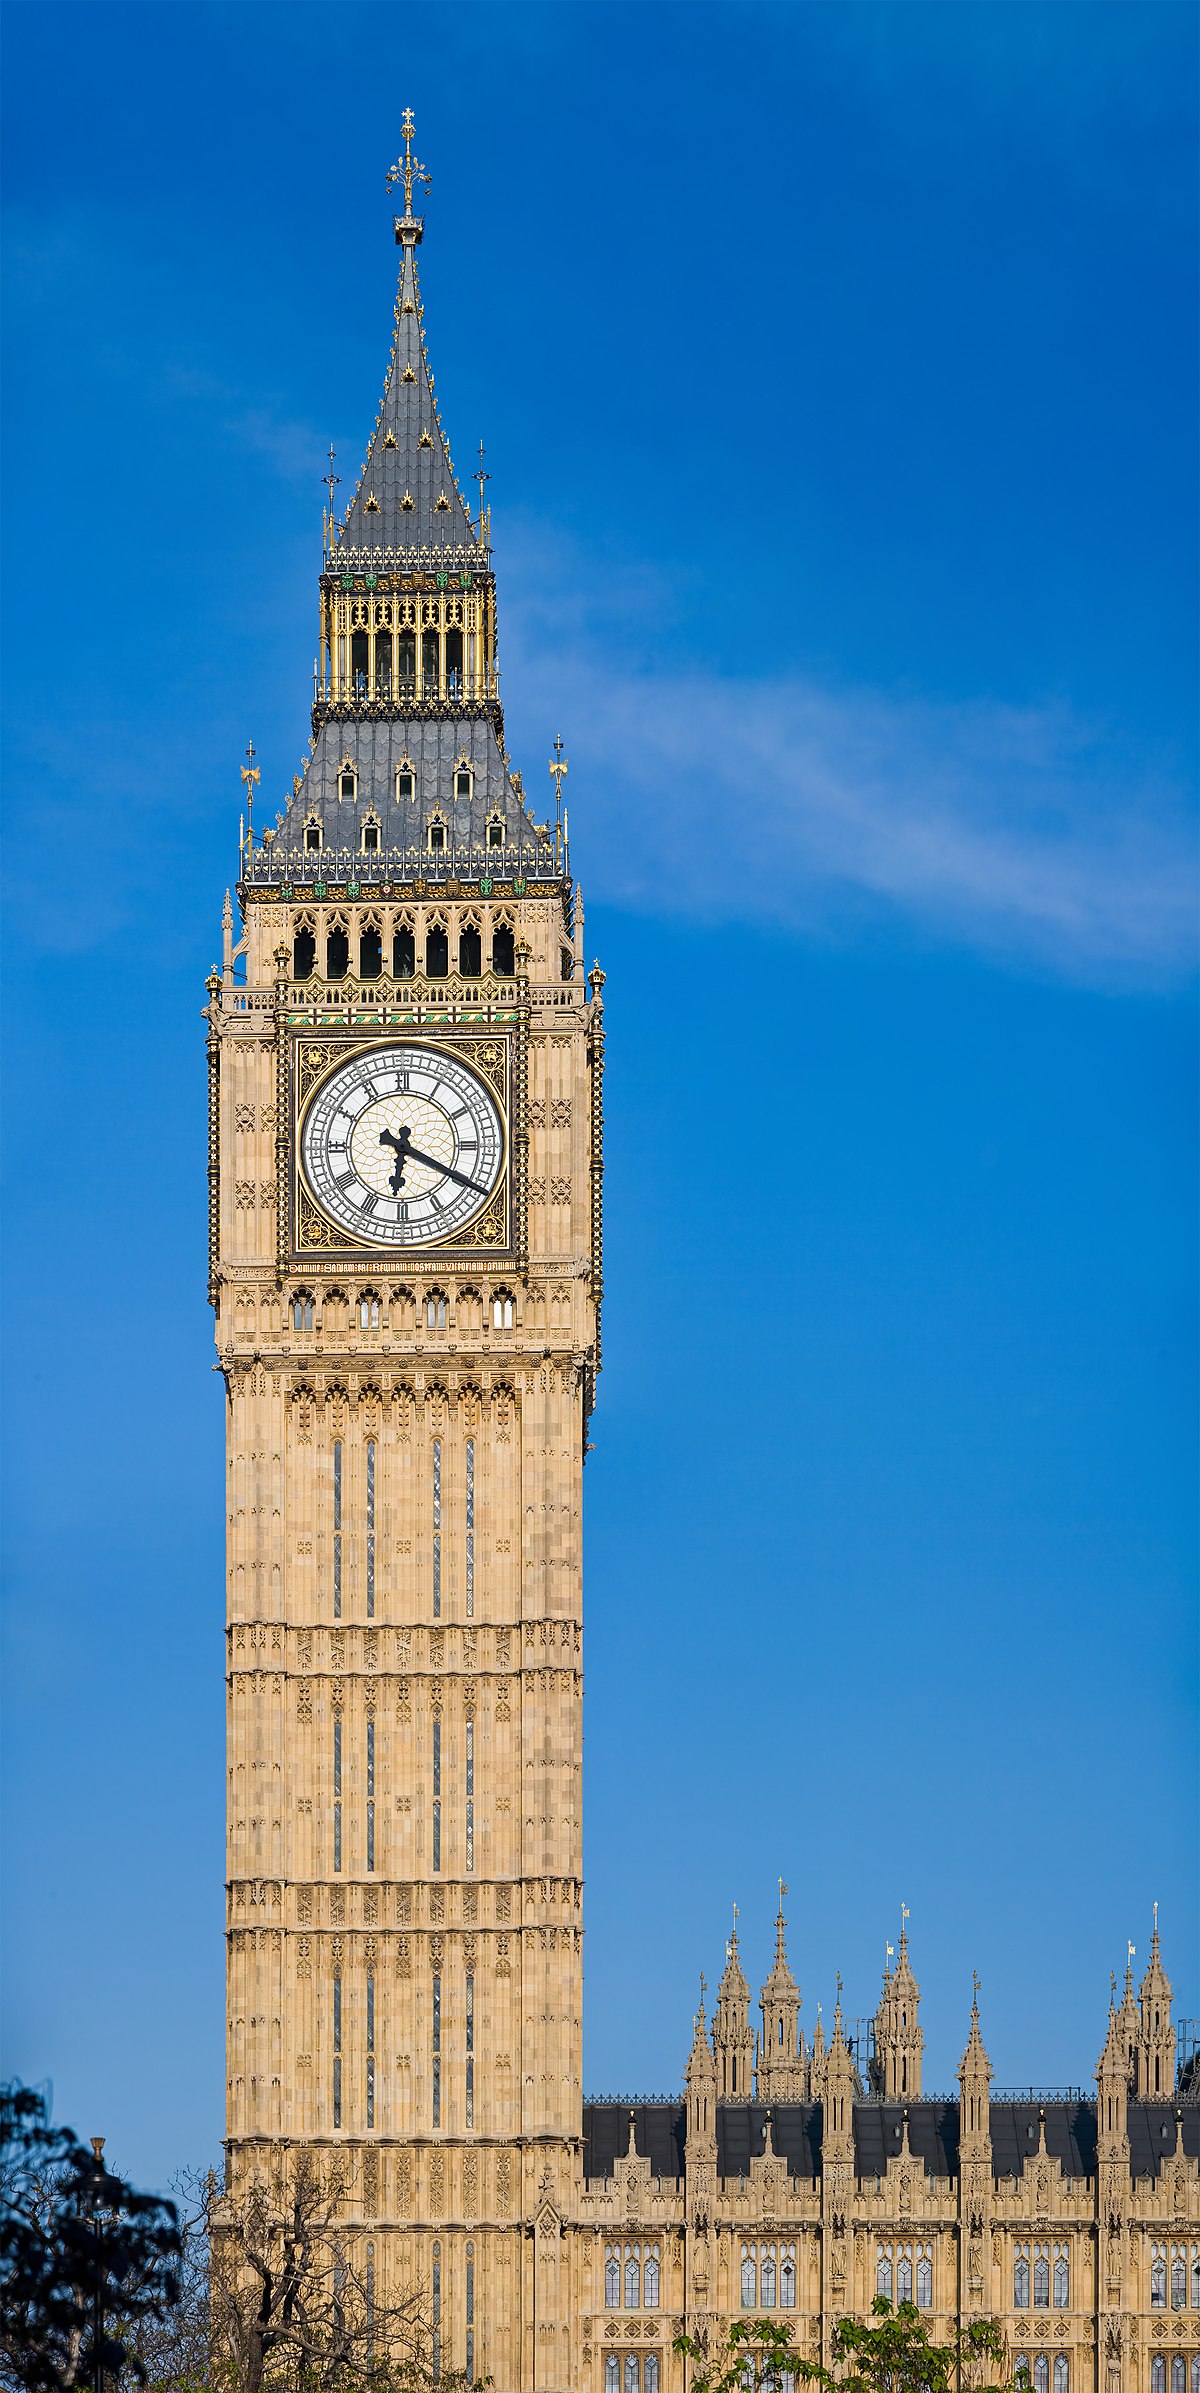 1200px-Clock_Tower_-_Palace_of_Westminster%2C_London_-_May_2007.jpg